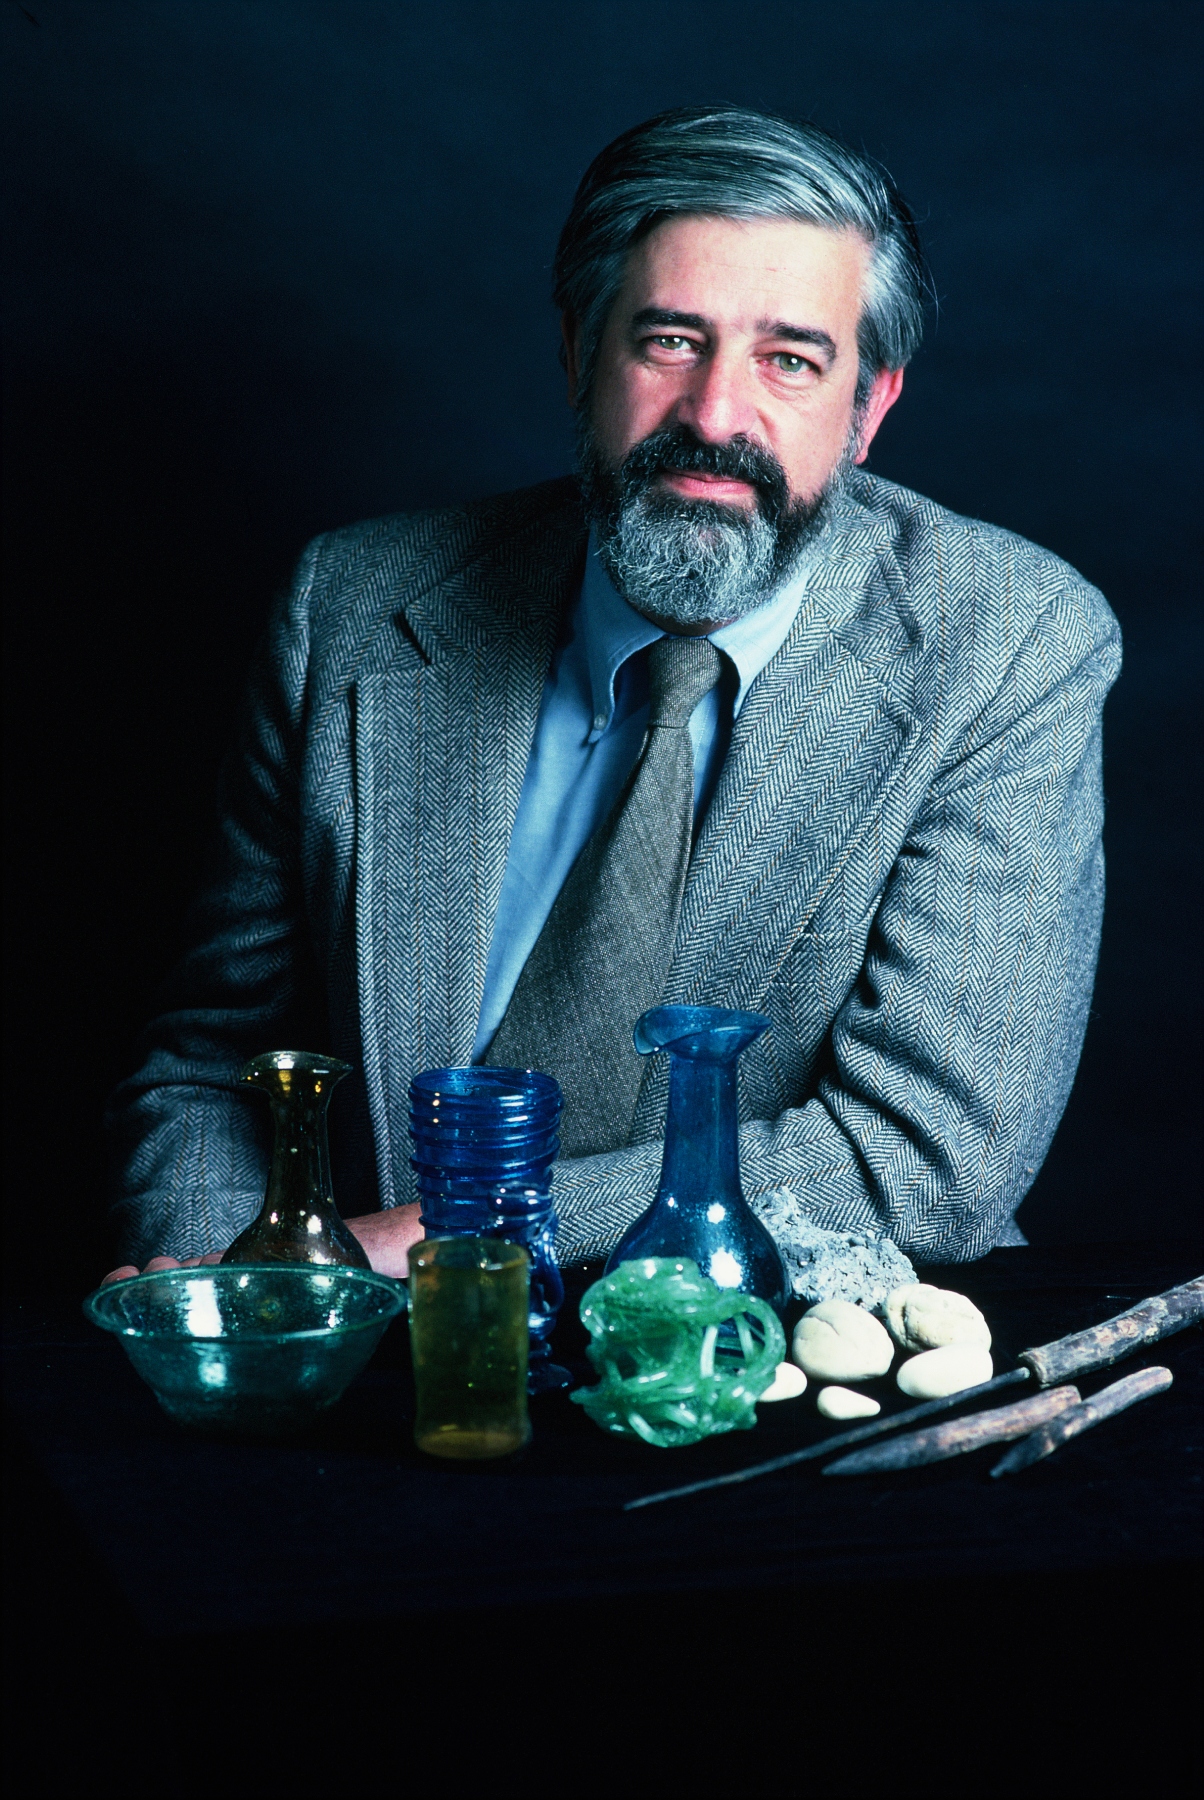 Bob Brill featured with Herat (Afghanistan) glass (1979). Image courtesy of The Corning Museum of Glass, Corning, NY.